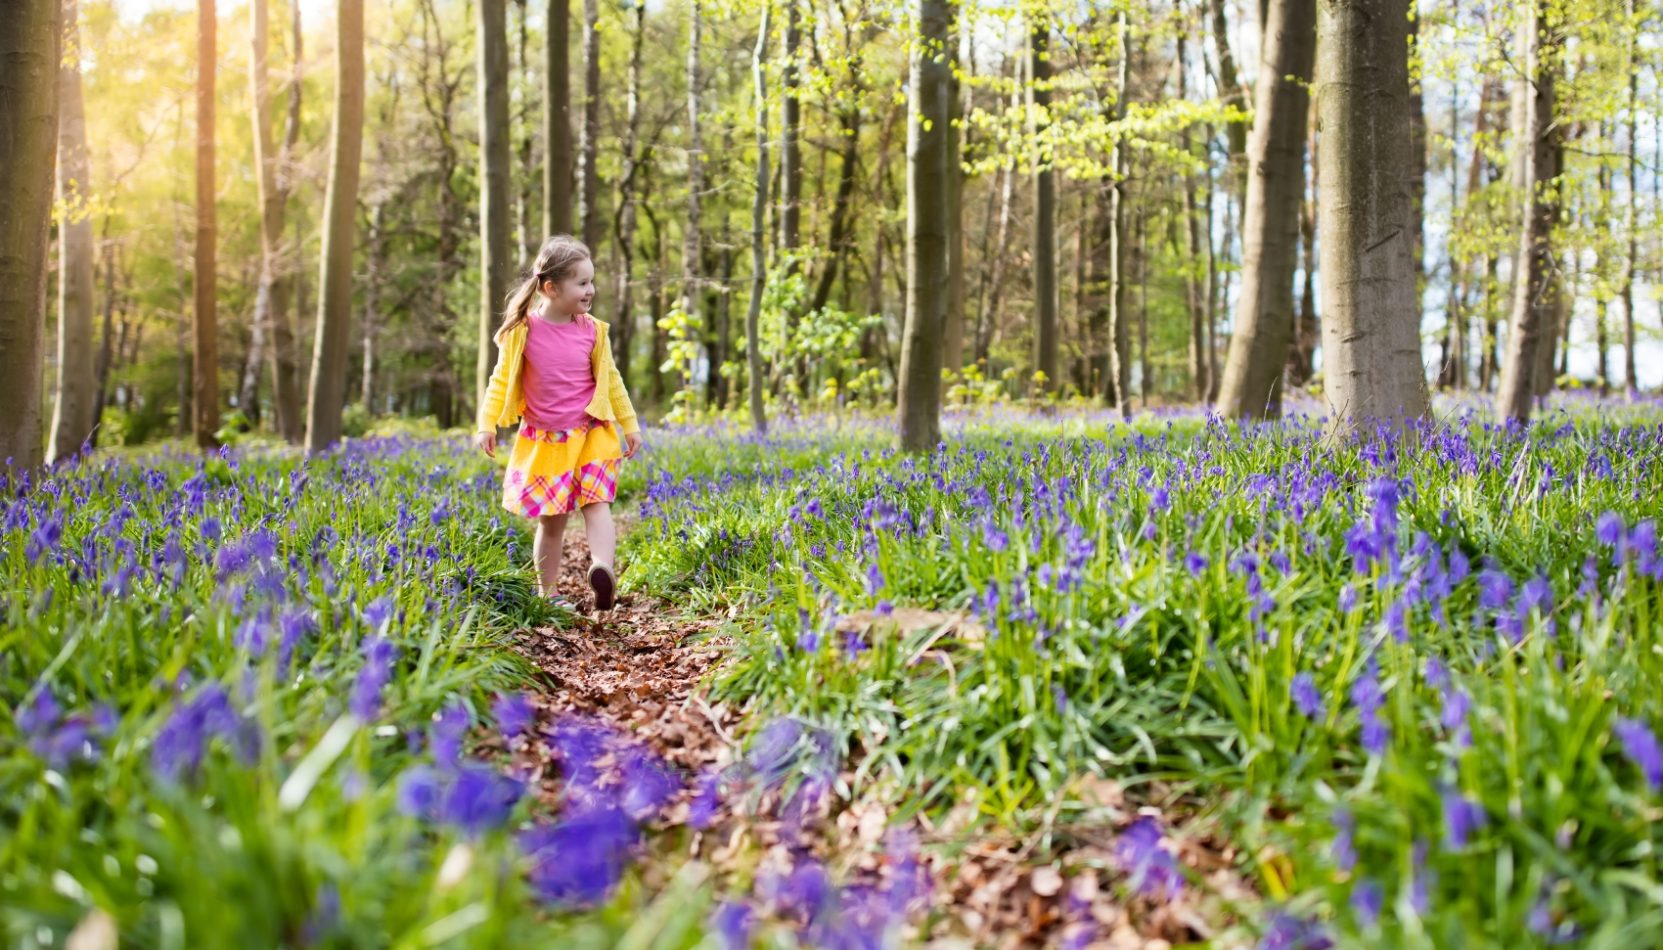 bluebells, squires garden centres, squires garden centre, spring, put a spring in your step, whats on, free things to do, freemium entertainment, guide to, guide to surrey, whats on, guide to whats on, outdoors, fresh air, gardening, gardens, nature, wellbeing,